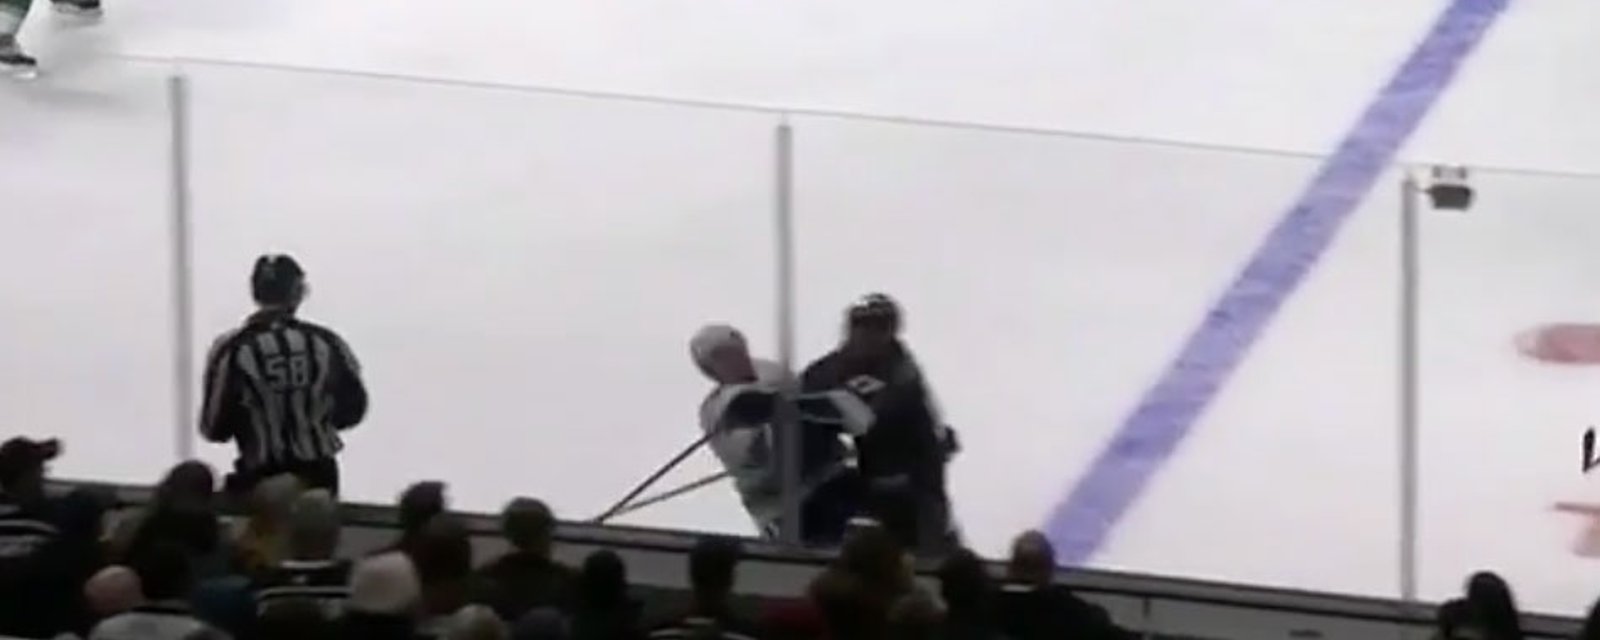 Kovalchuk drops two Canucks players on the same shift! 